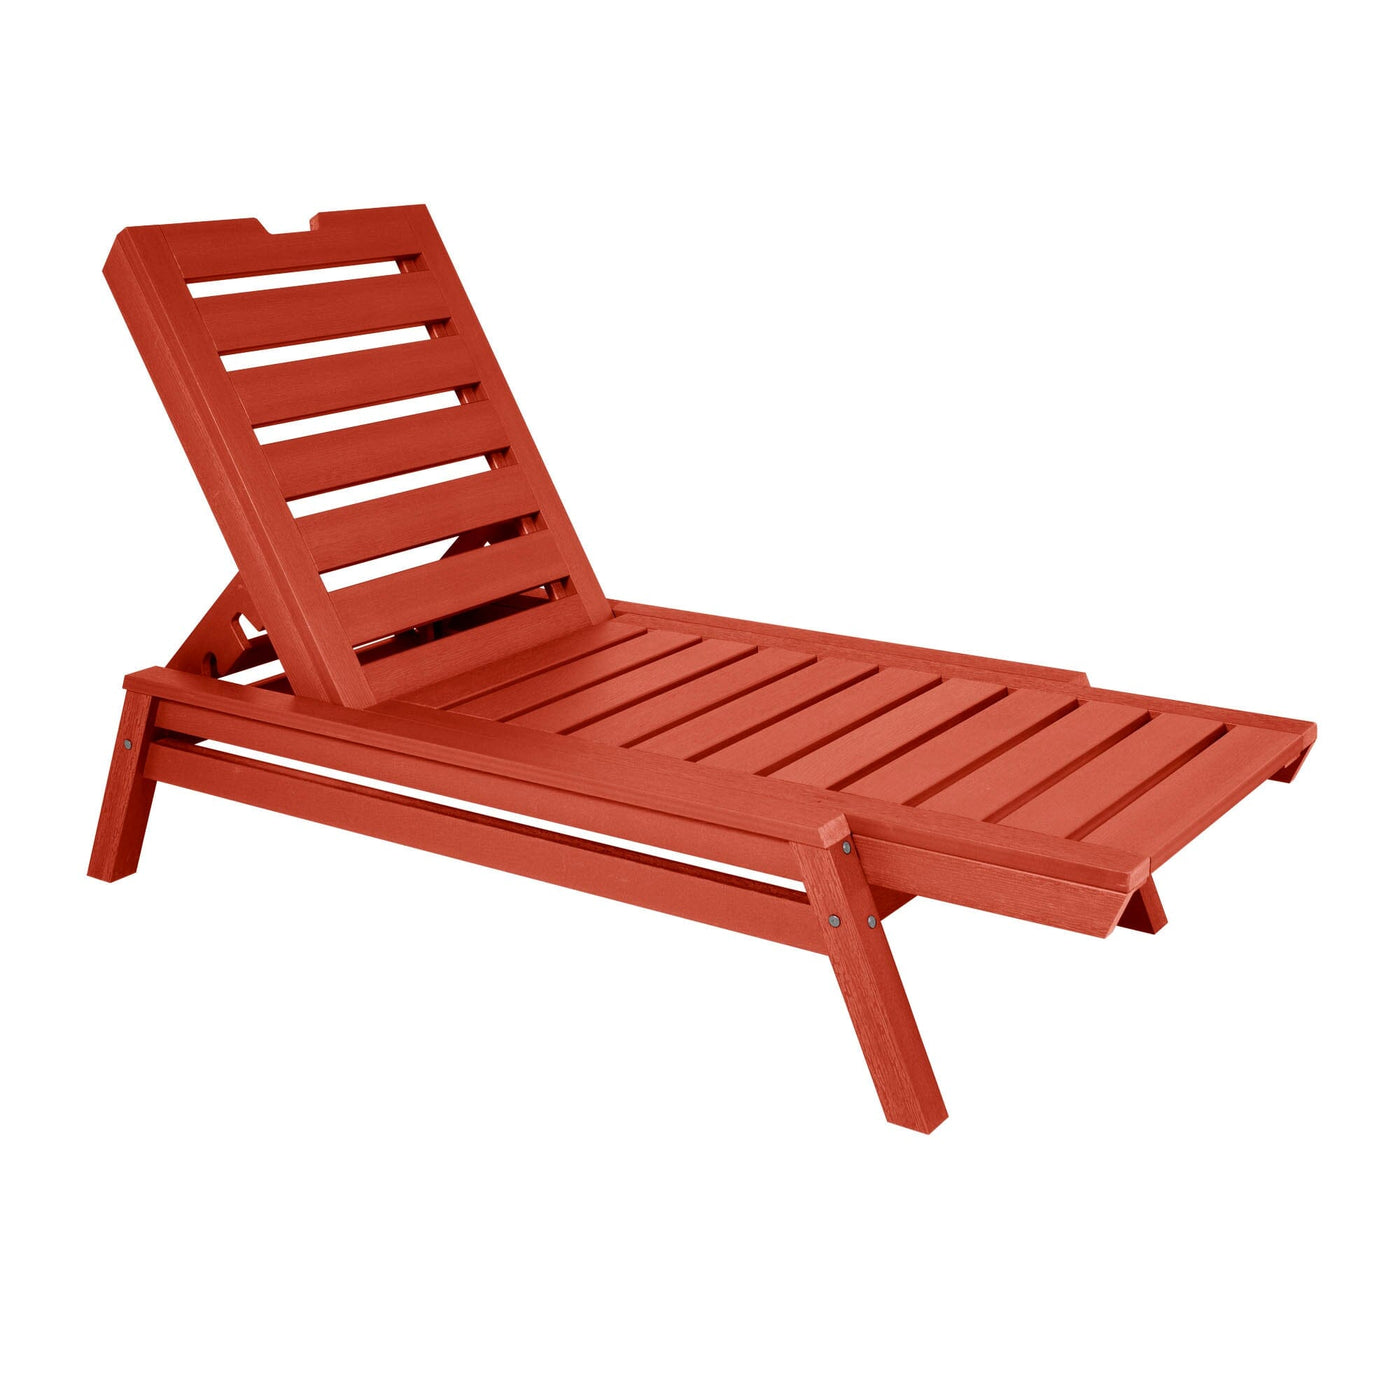 Crestone Chaise Lounge Lounge Sequoia Rustic Red 